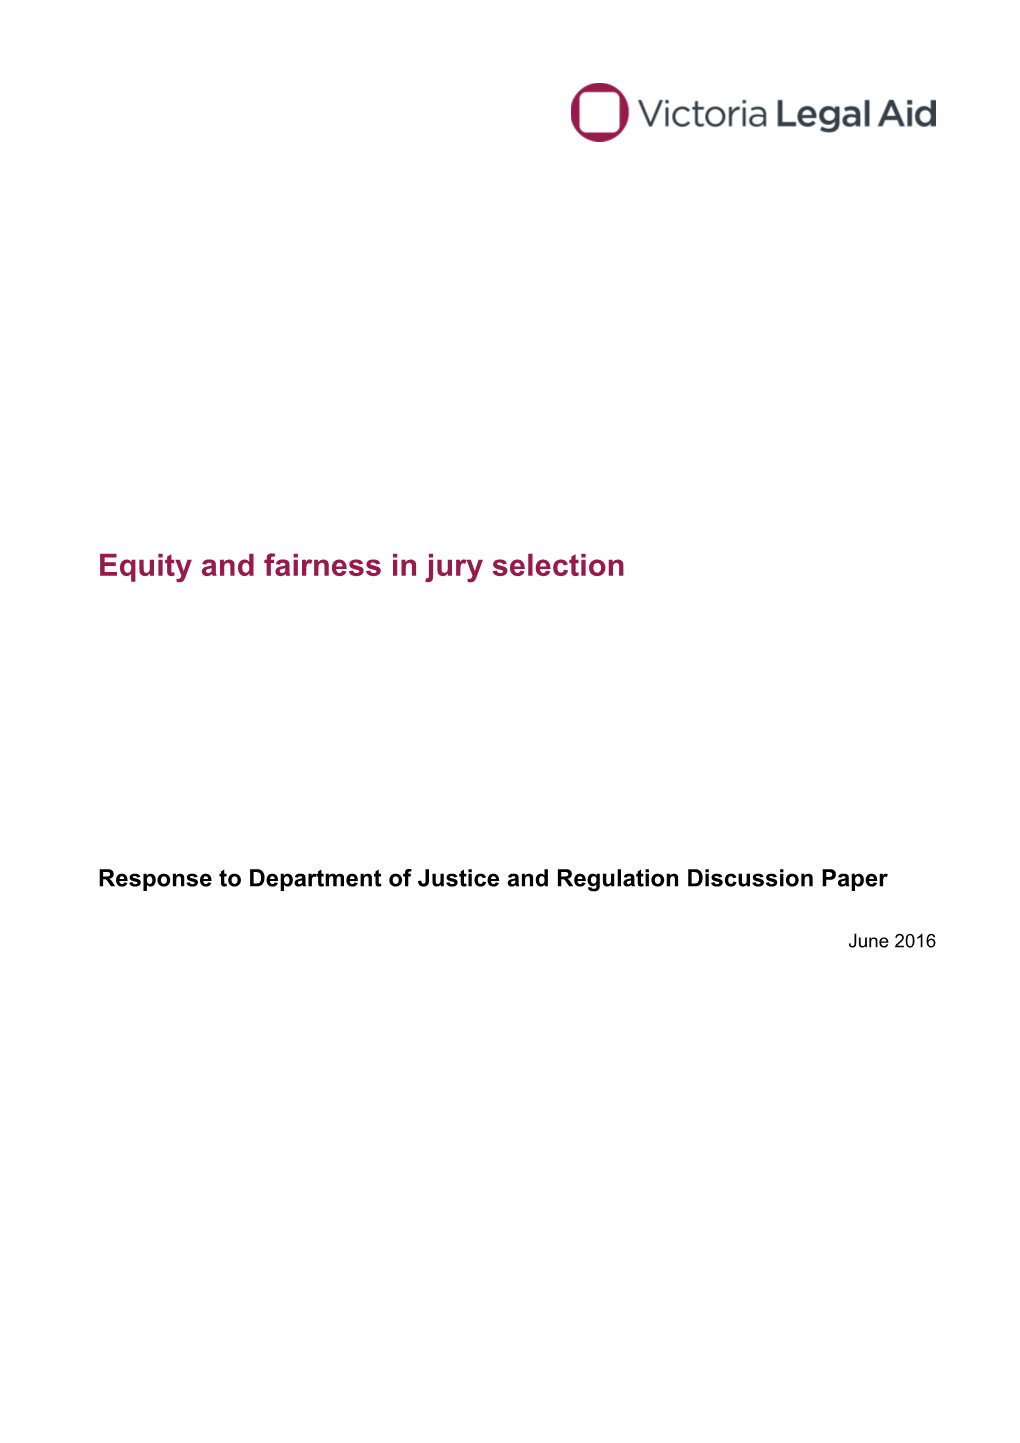 Equity and Fairness in Jury Selection Submission